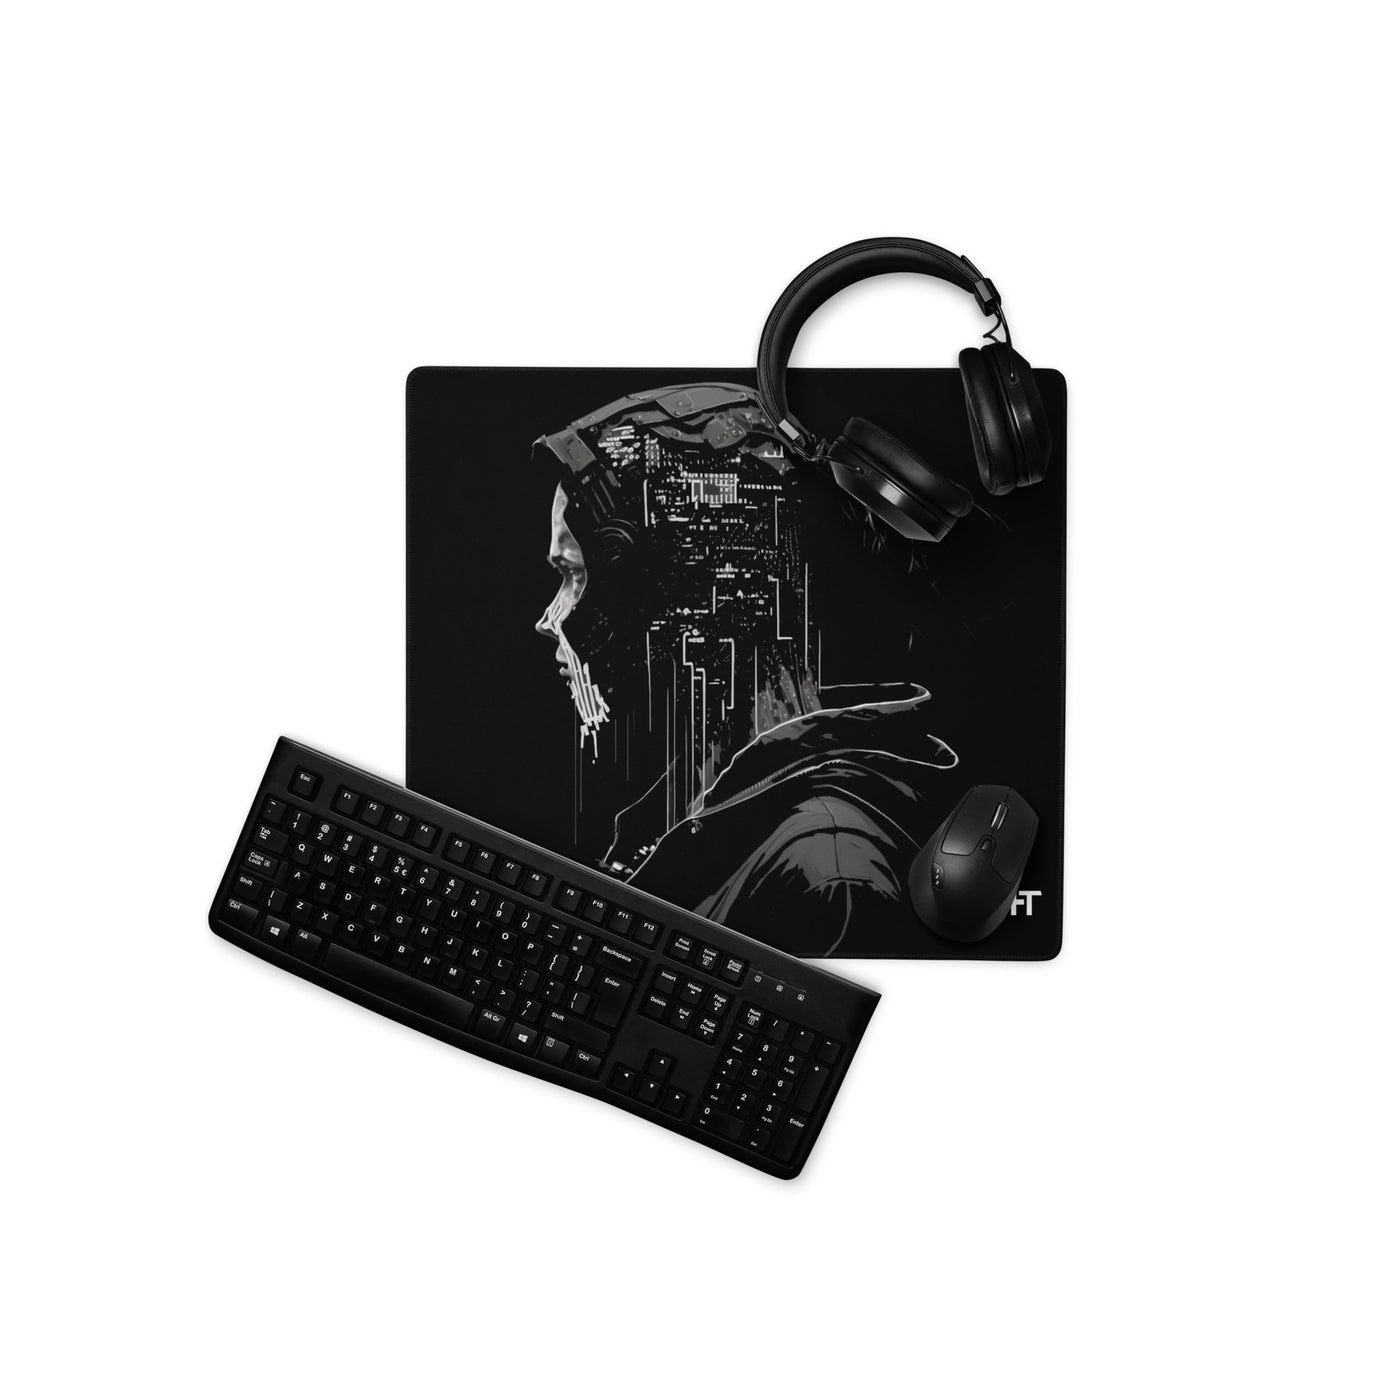 Cyberware assassin v37 - Gaming mouse pad